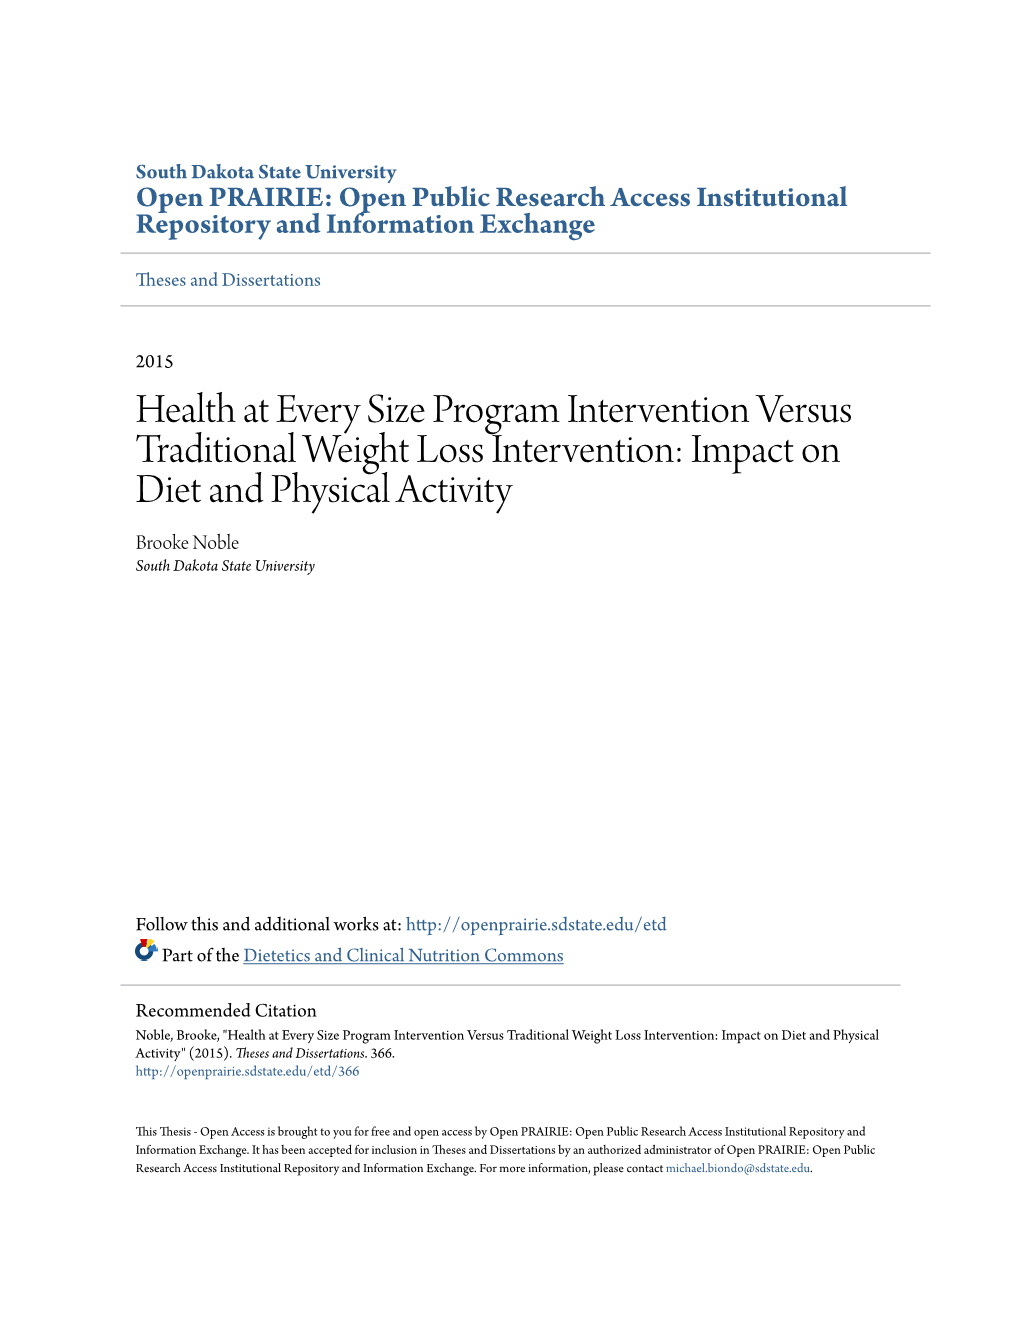 Health at Every Size Program Intervention Versus Traditional Weight Loss Intervention: Impact on Diet and Physical Activity Brooke Noble South Dakota State University